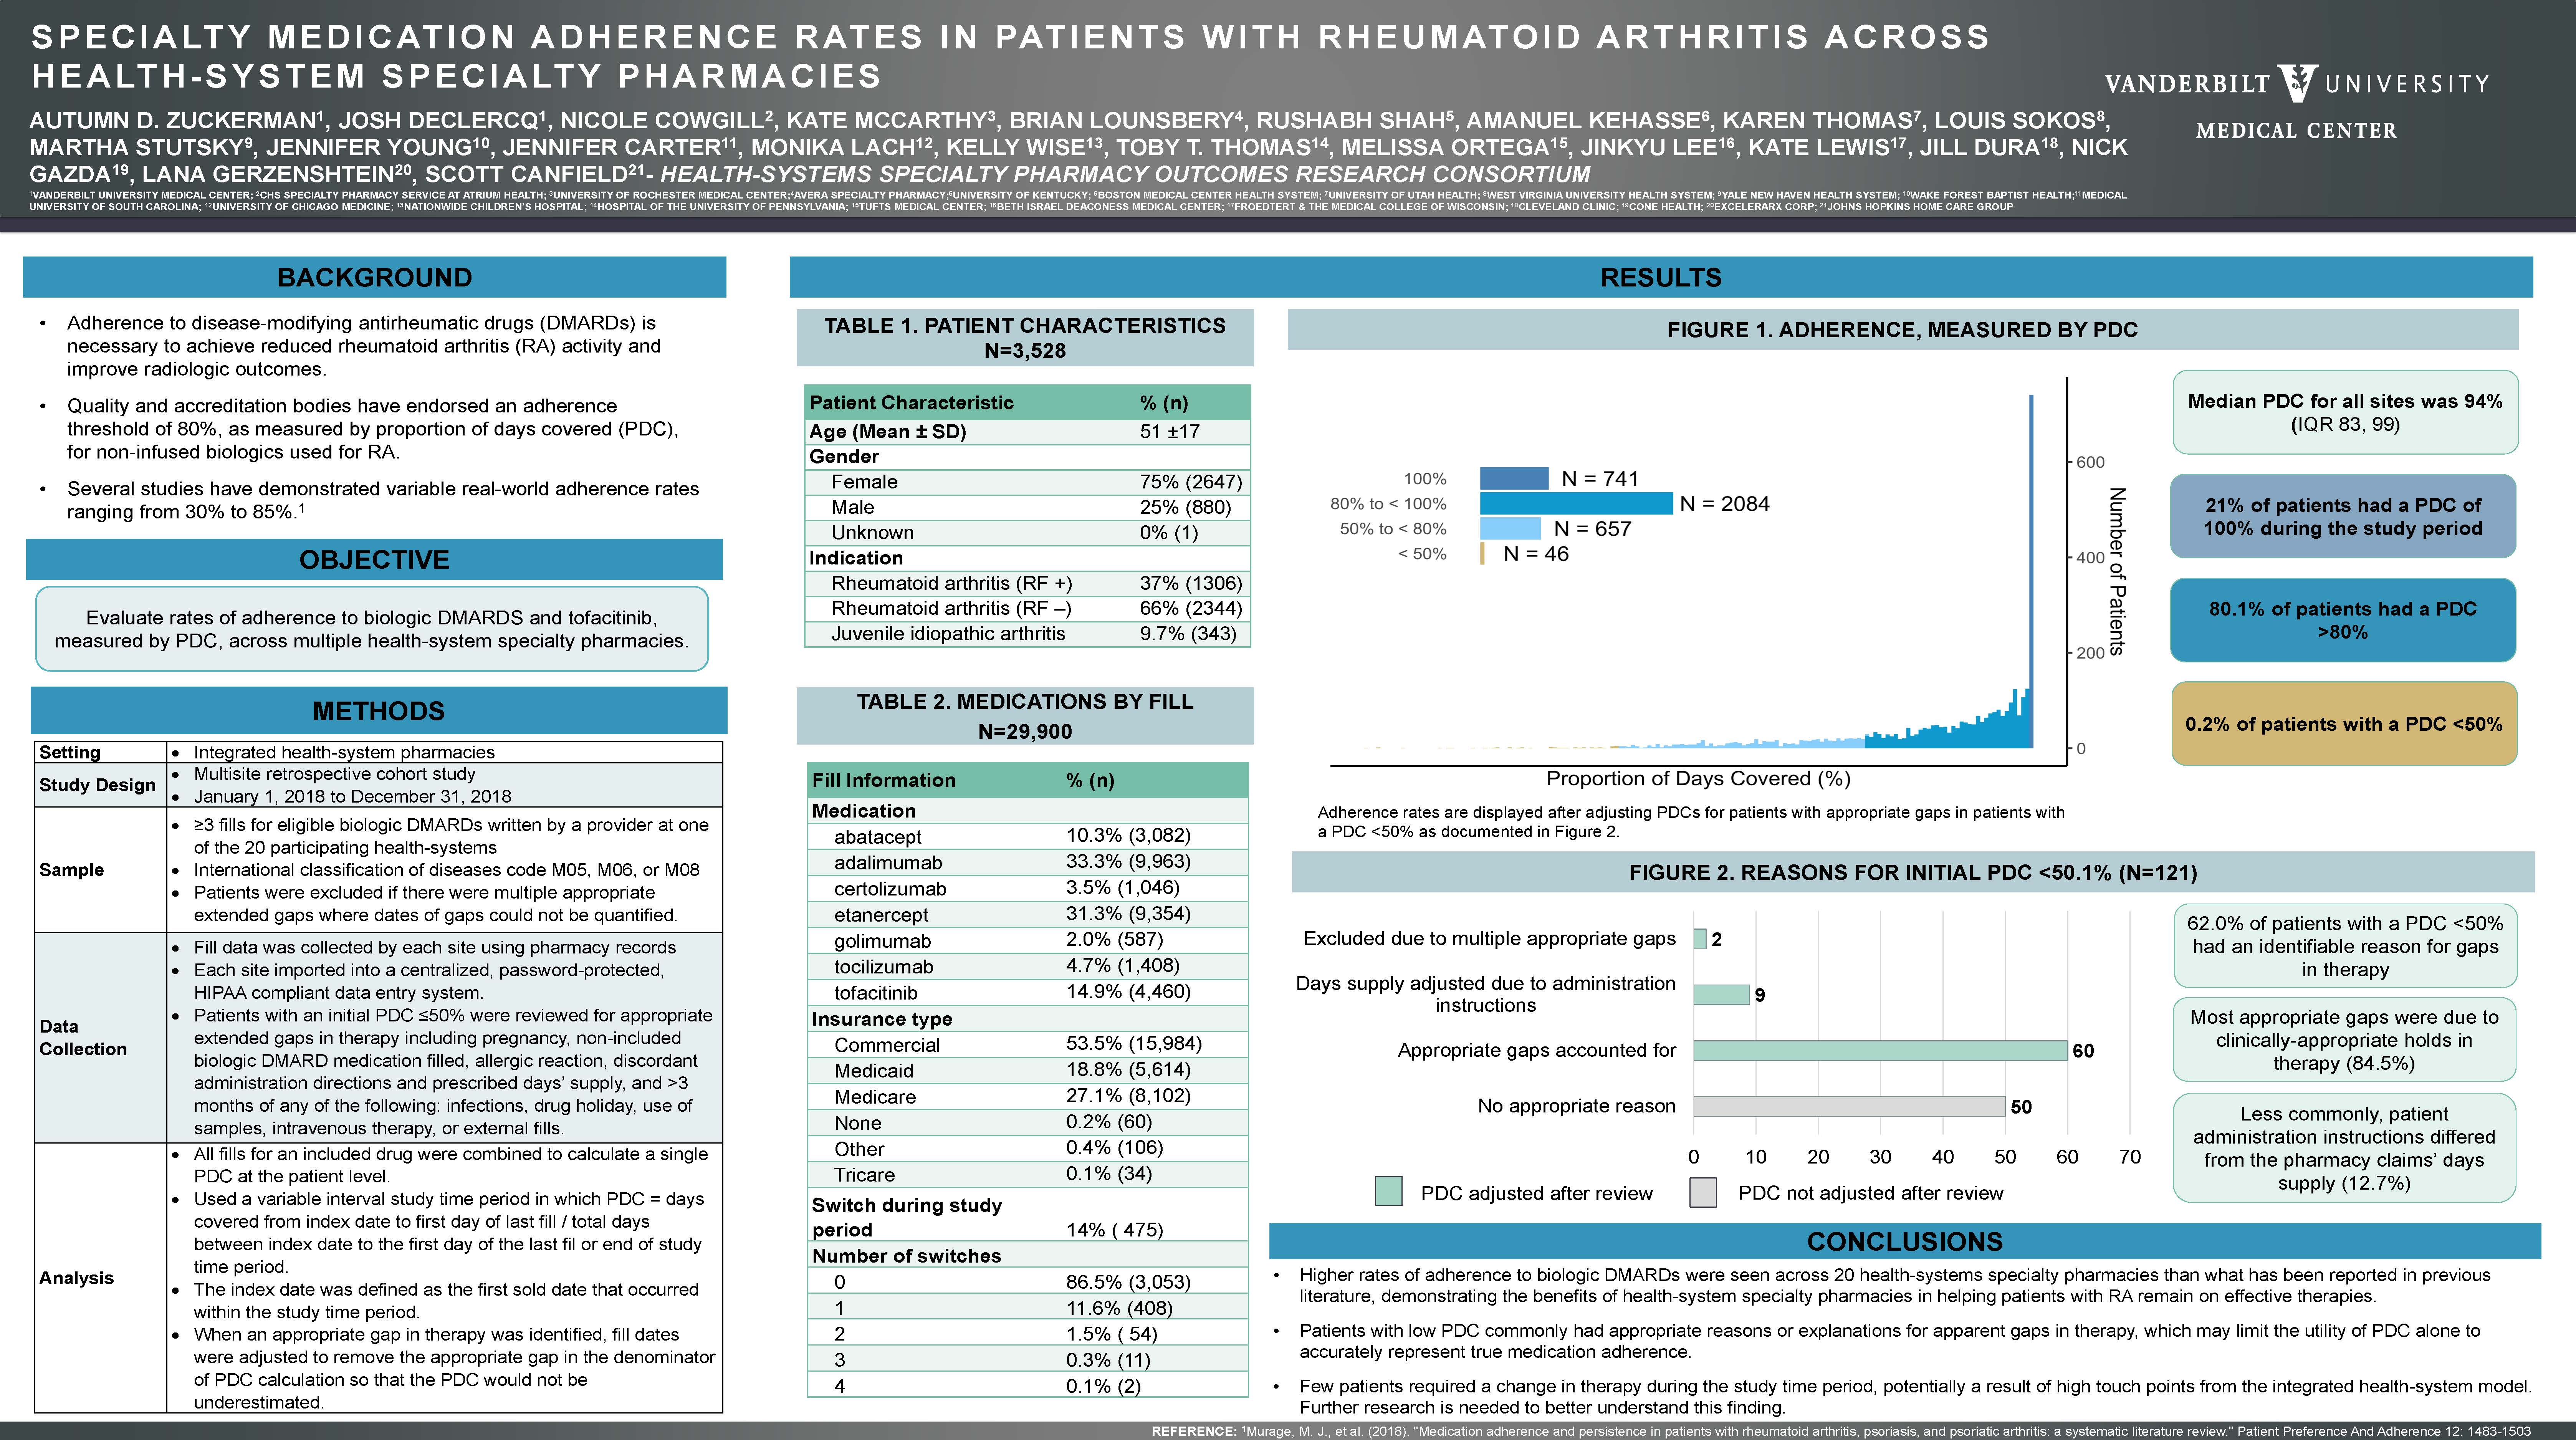 Specialty Medication Adherence Rates in Patients with Rheumatoid Arthritis across Health-System Specialty Pharmacies Poster